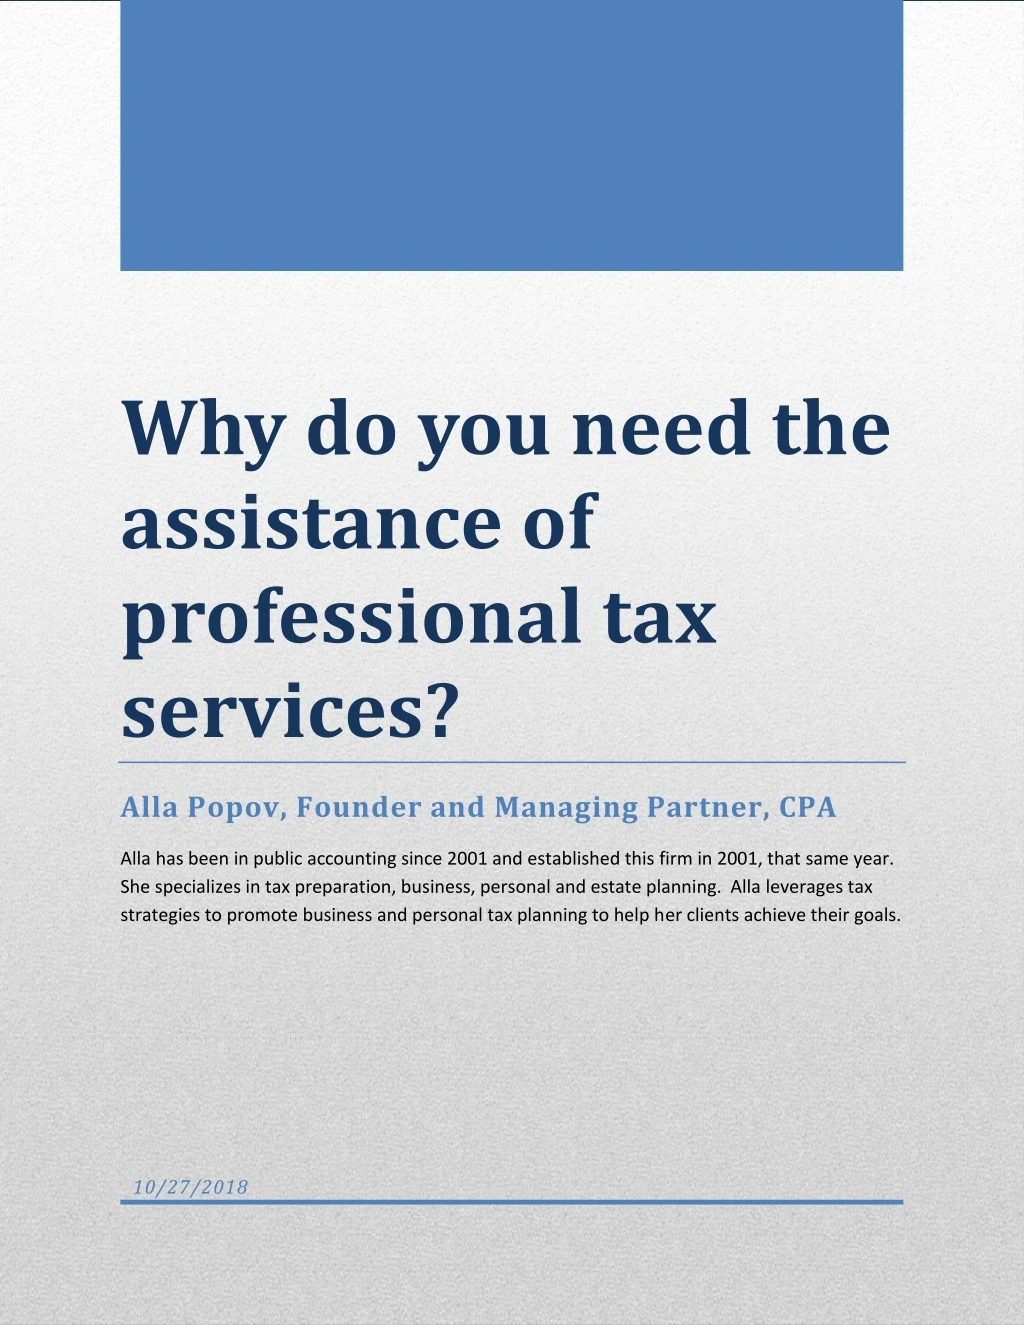 why do you need the assistance of professional